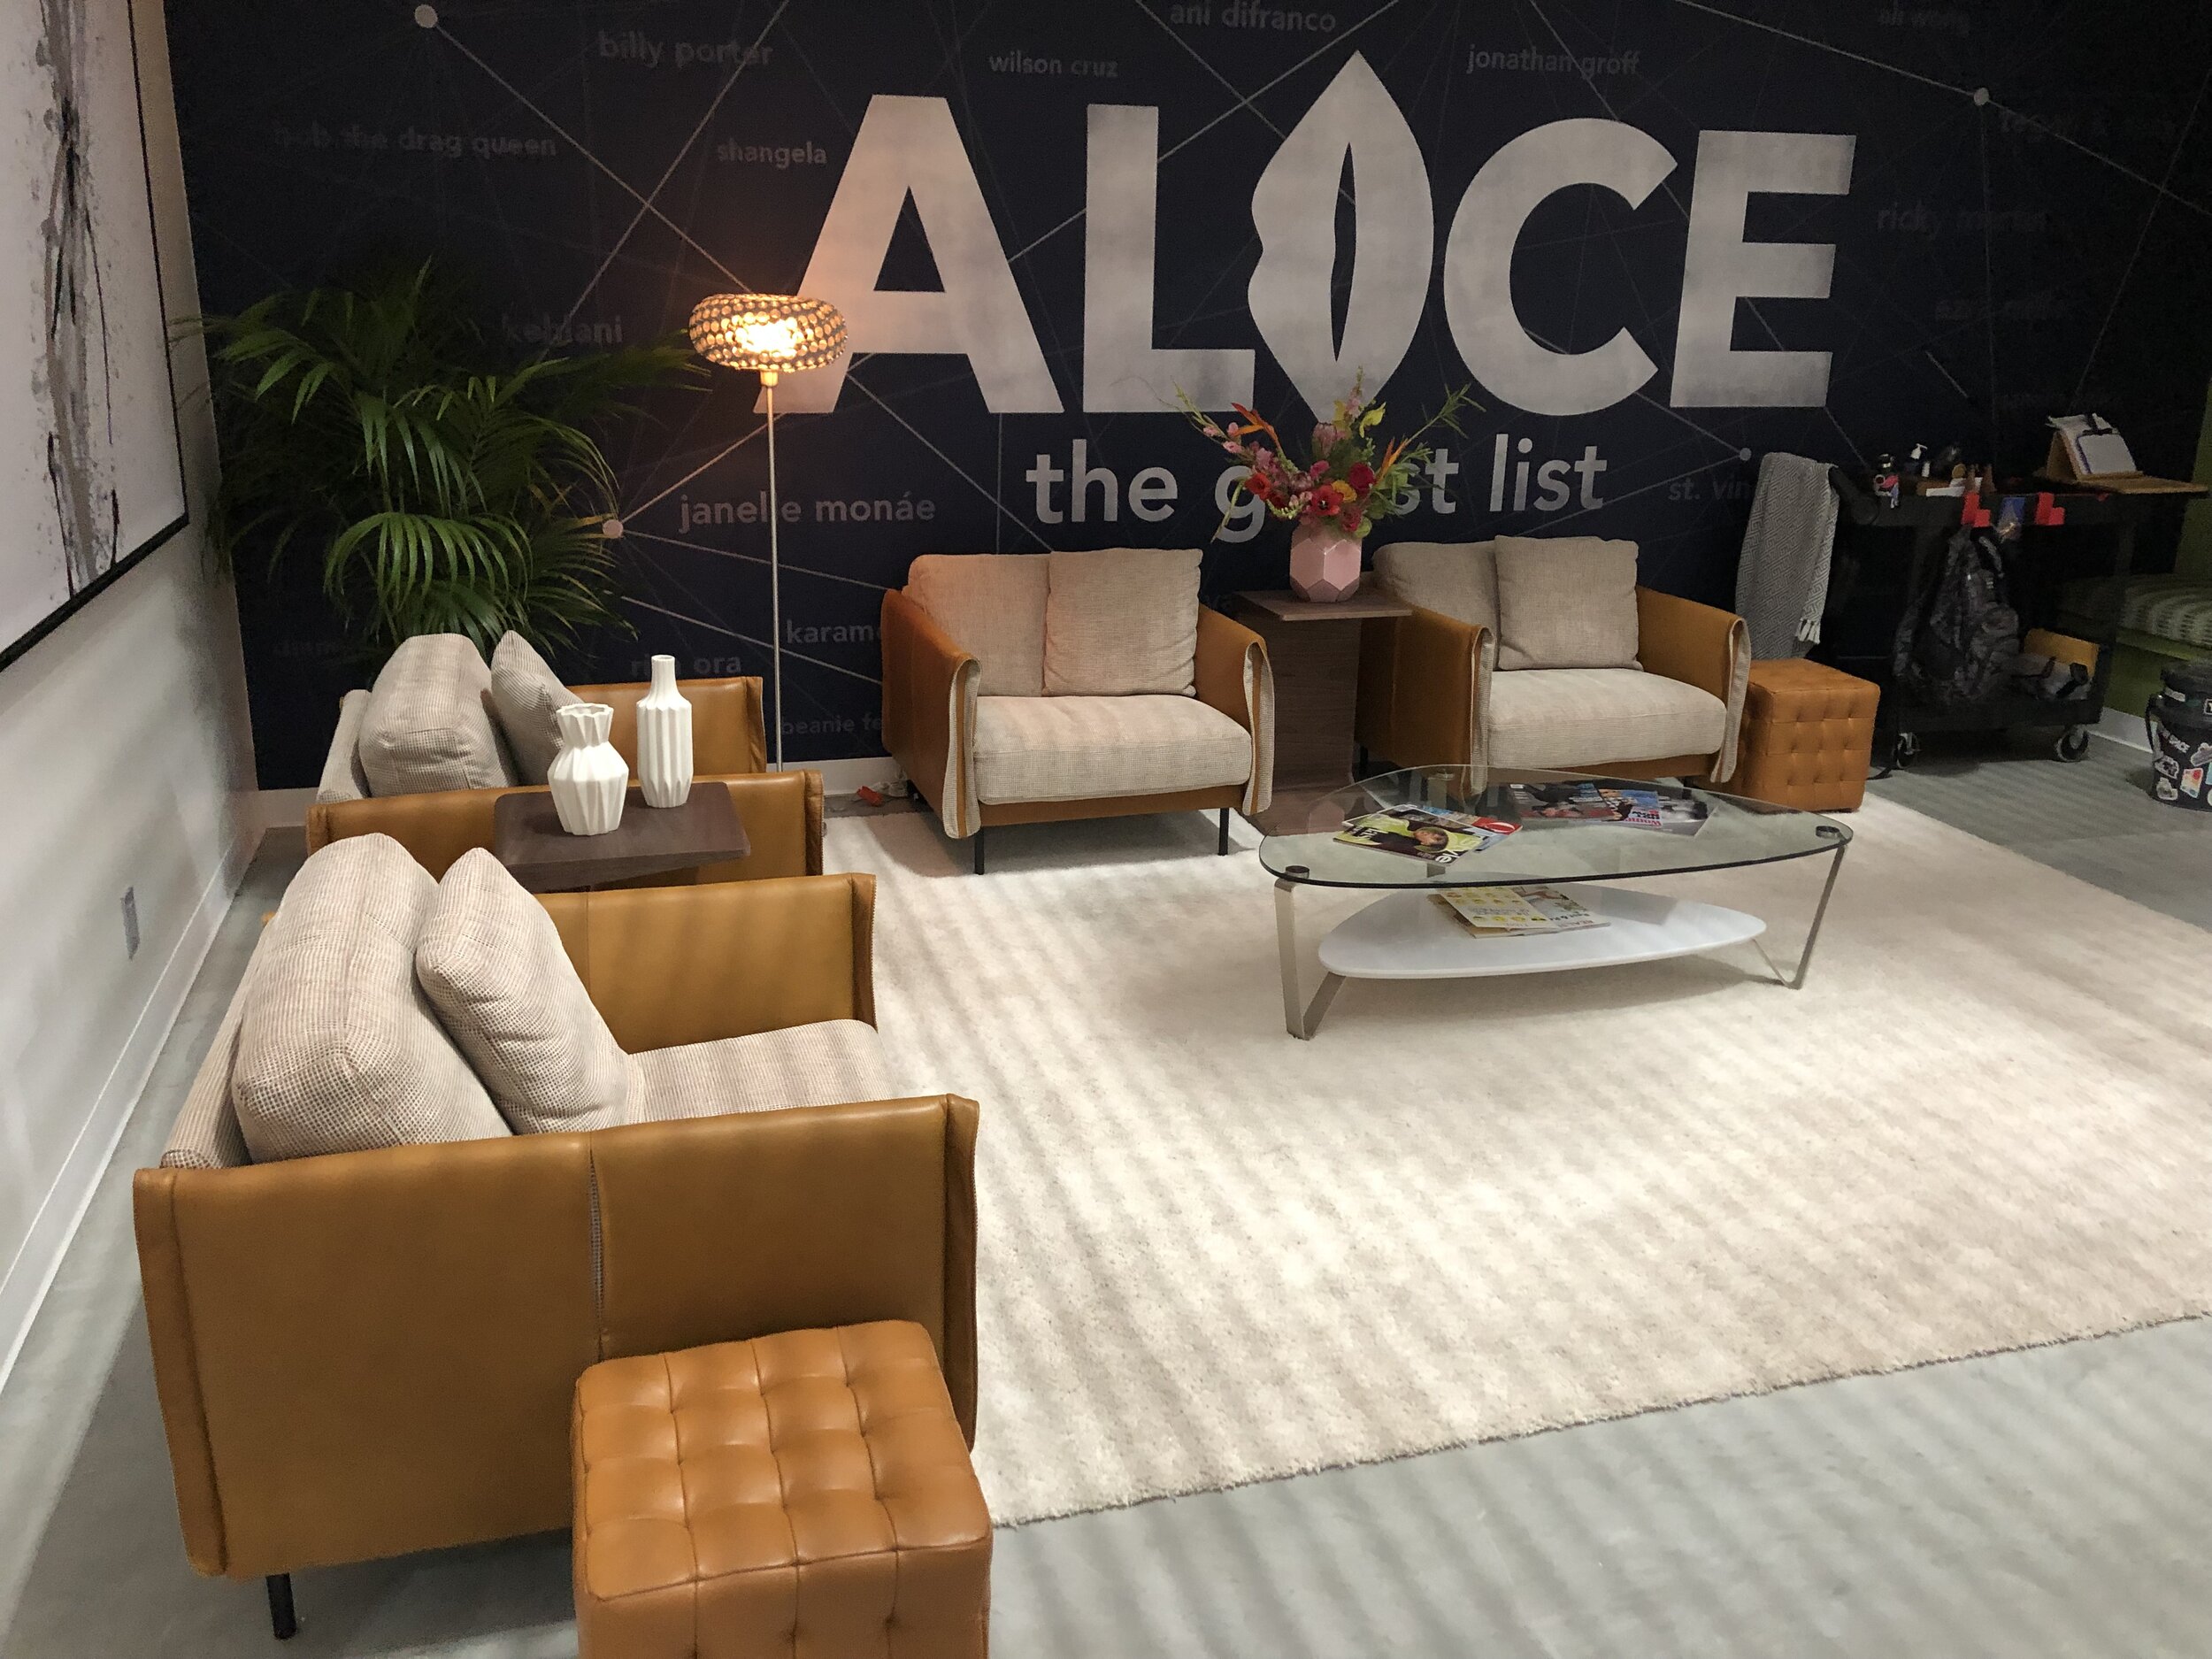 Alice's Talk Show - Production Offices